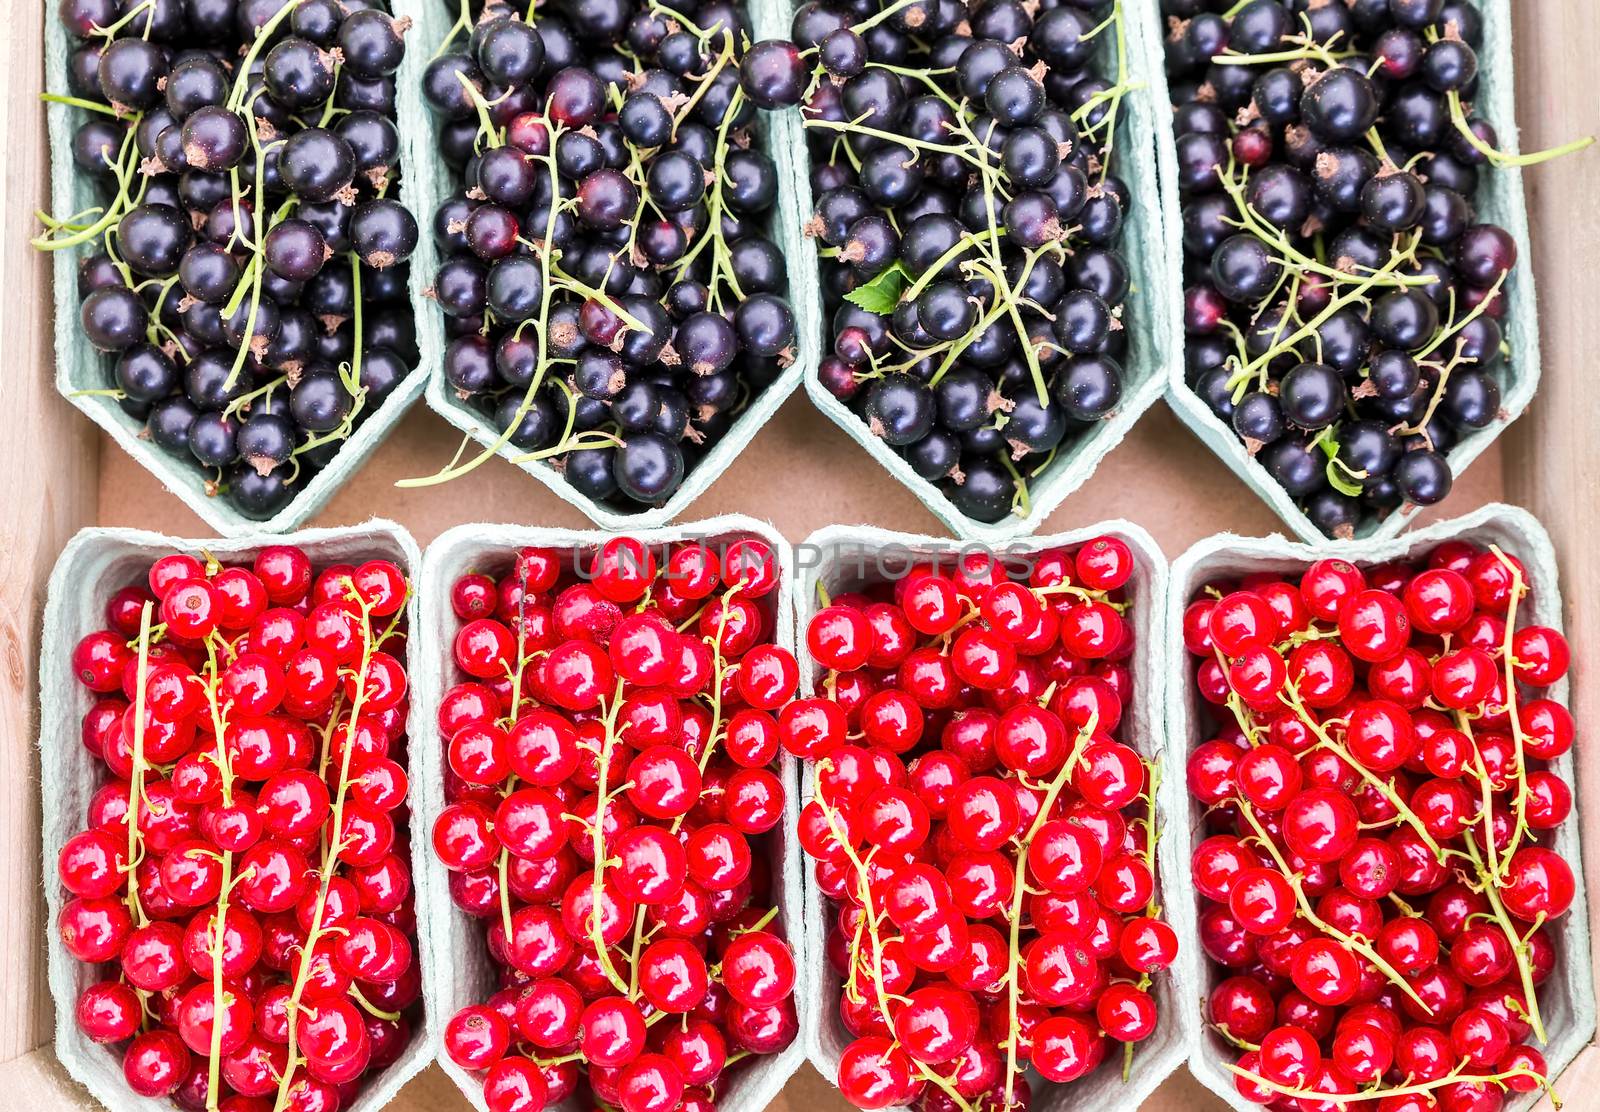 Fruit baskets with red berries and black currants by BenSchonewille